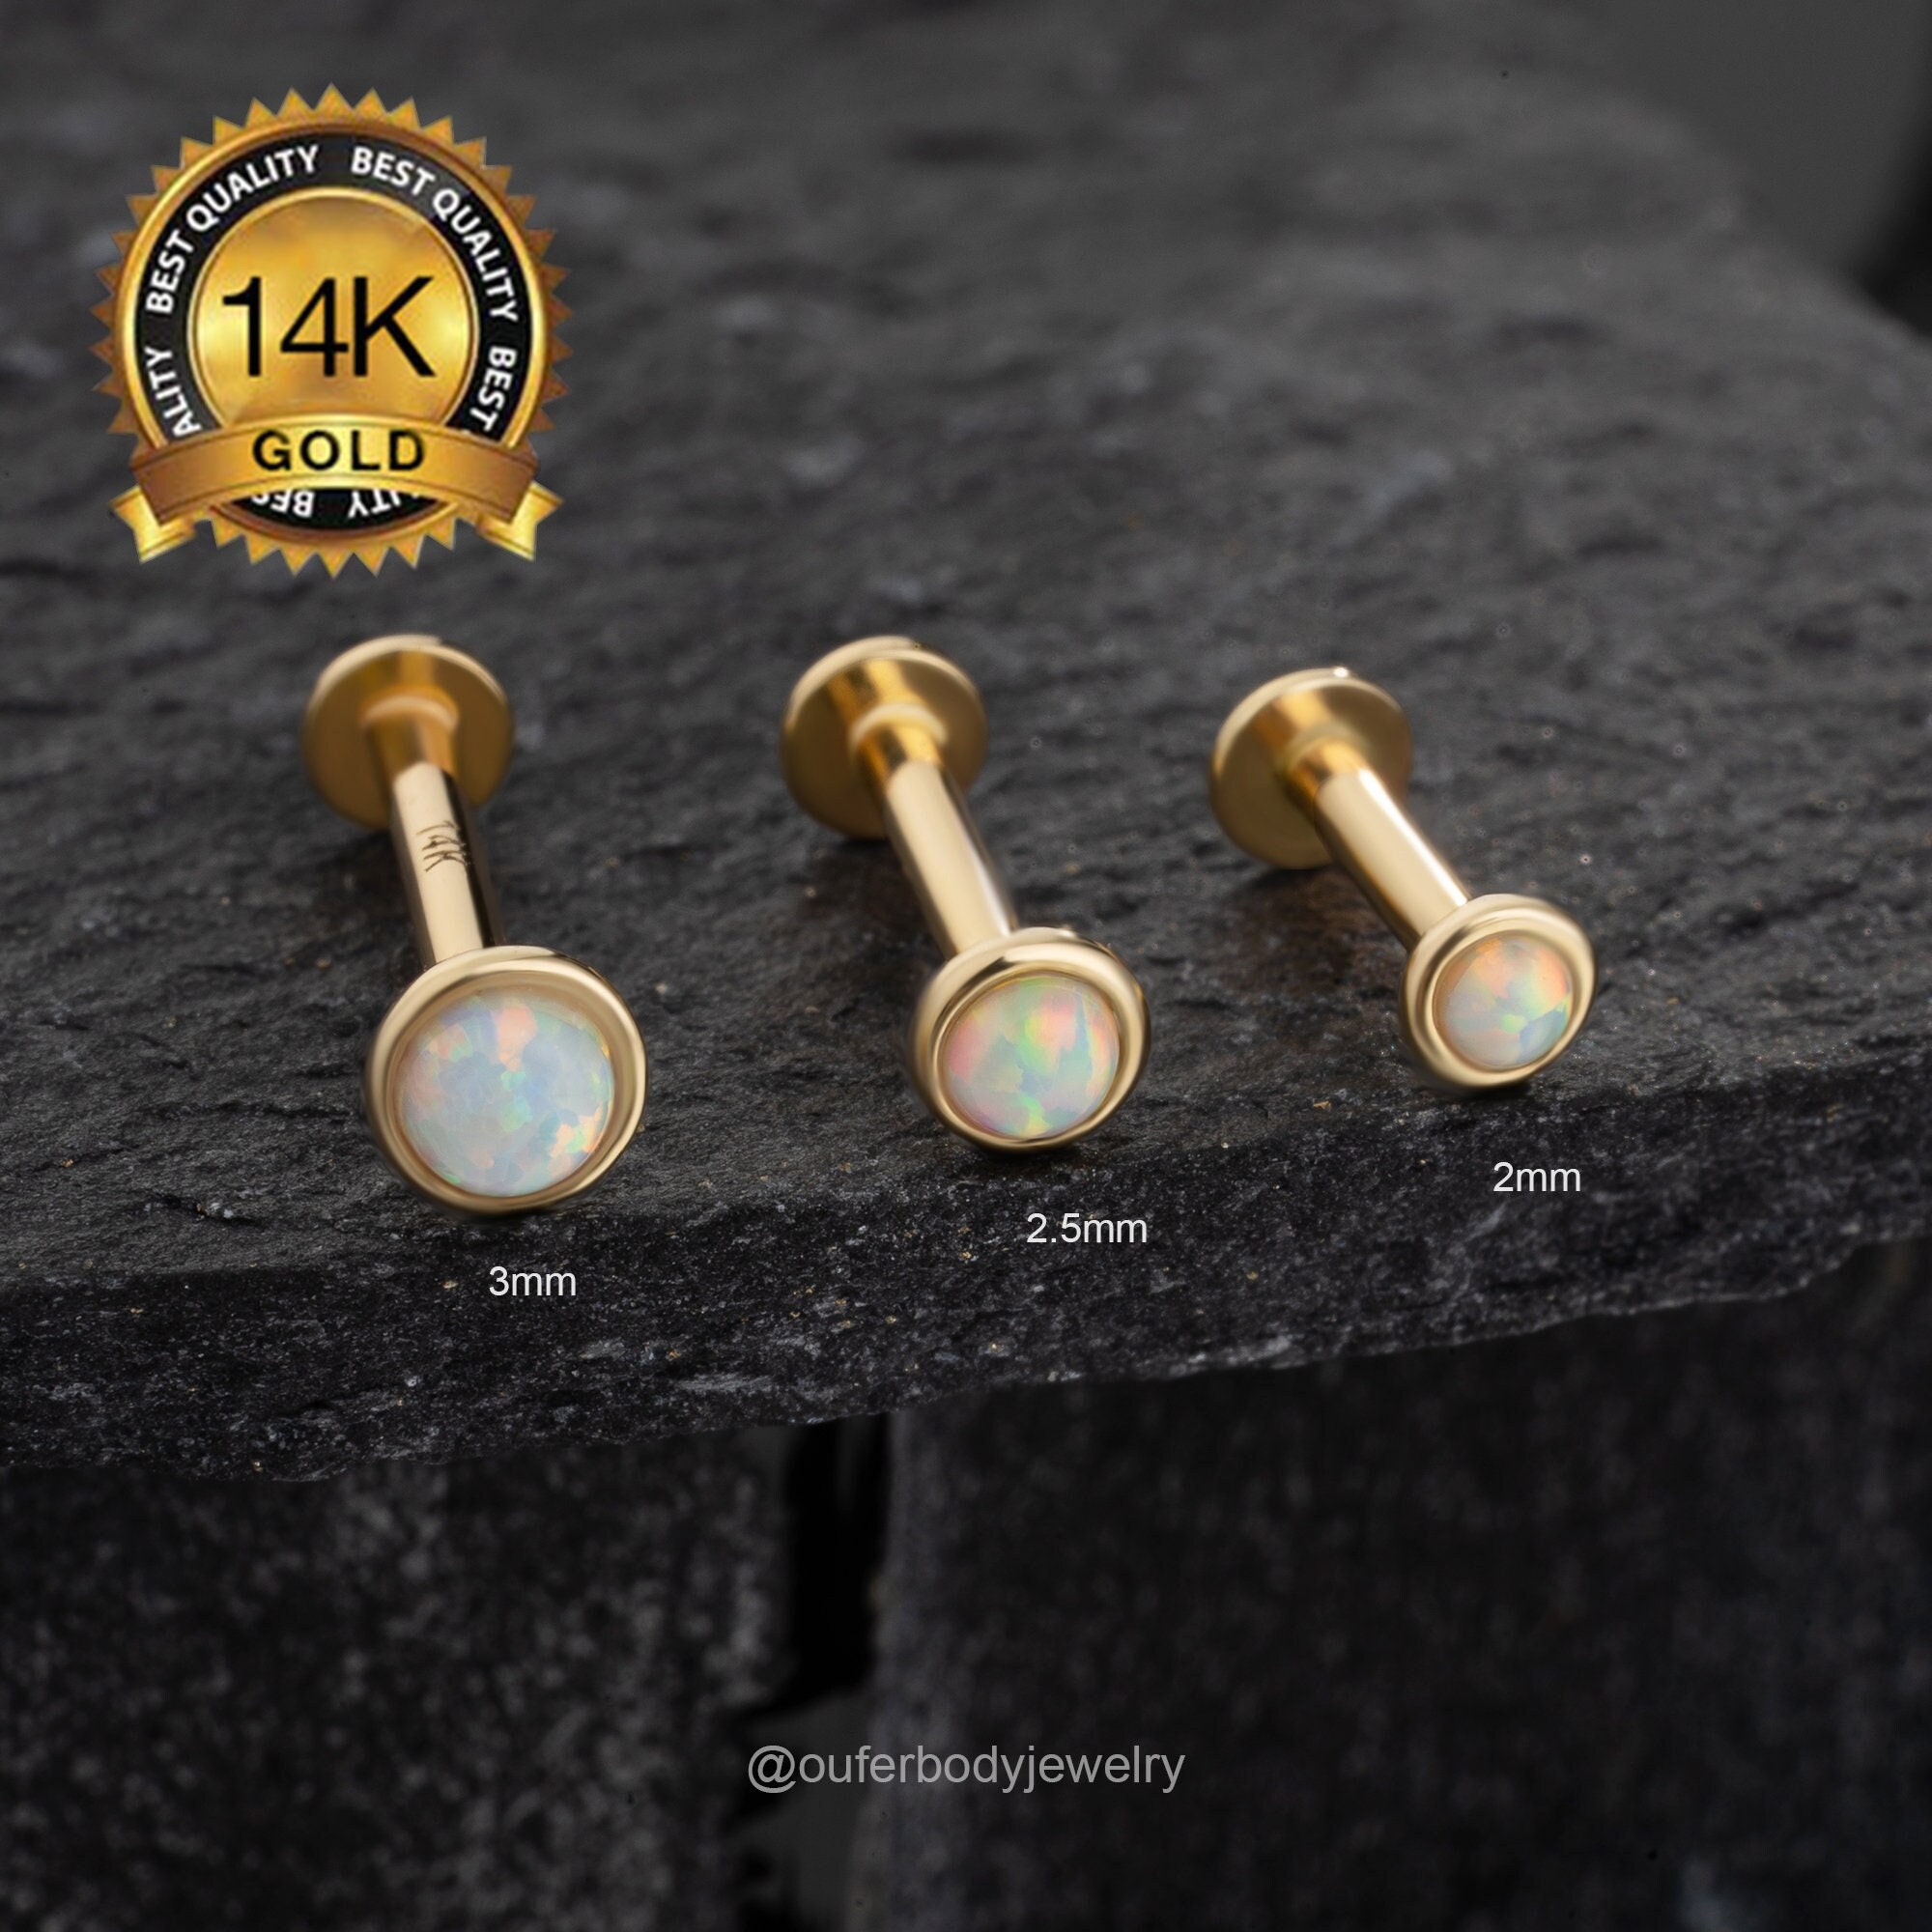 14K Solid White & Yellow Gold Replacement Single Screw Back for Stud  Earrings 